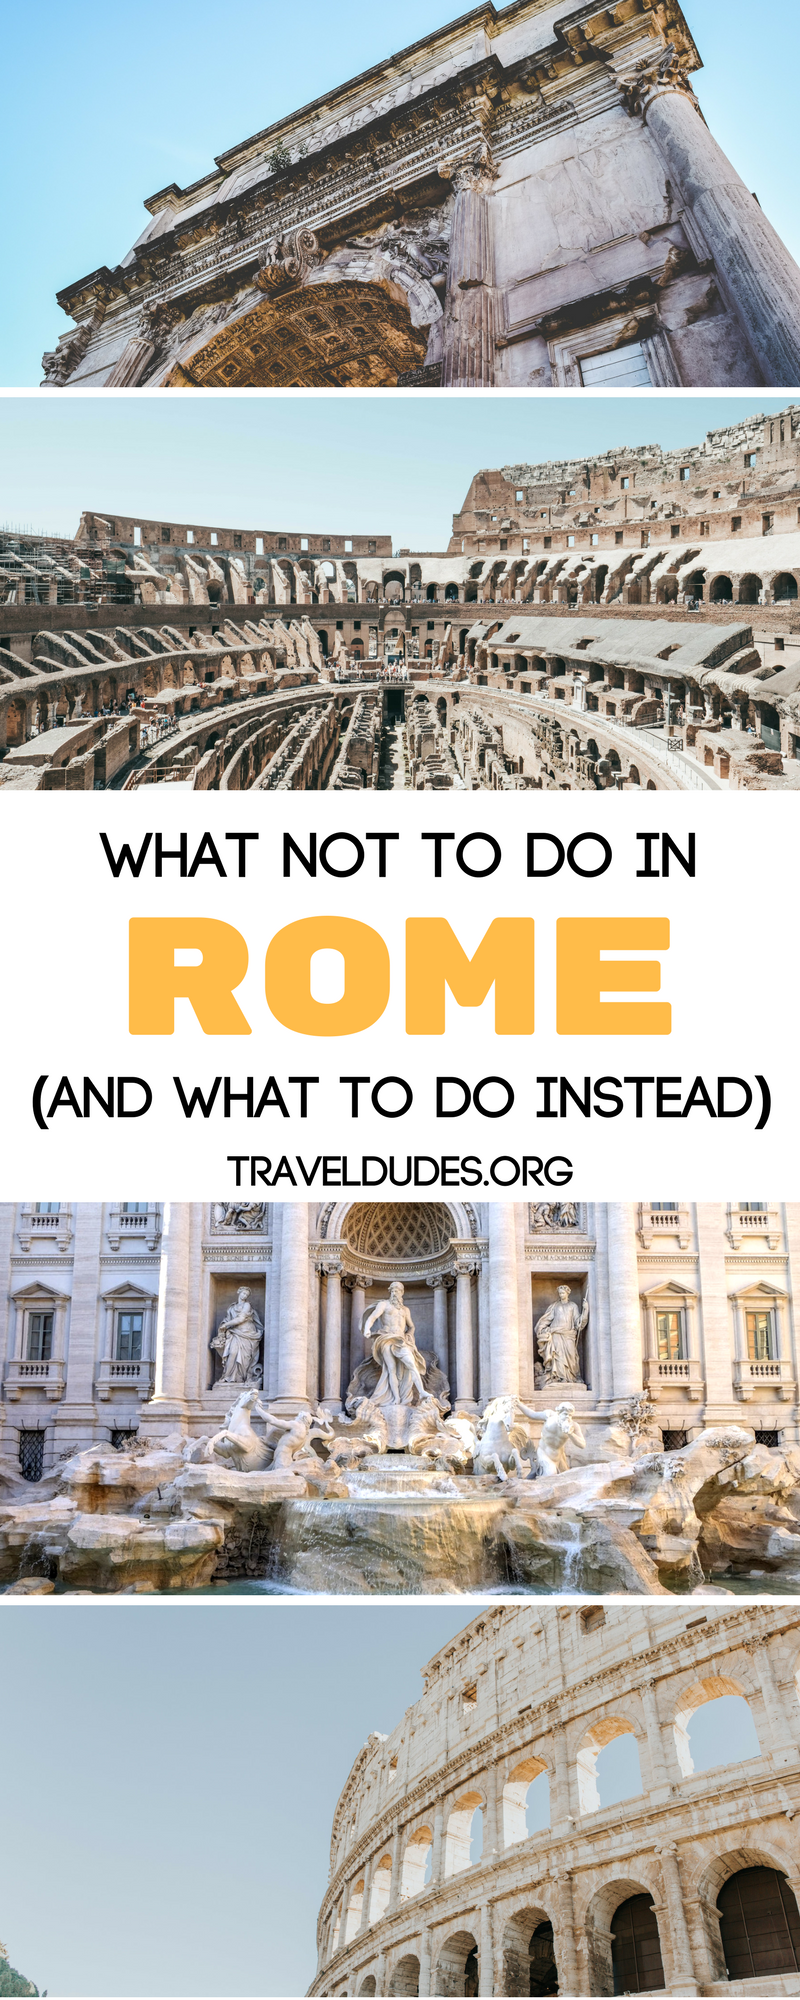 Tourist Alert! 10 Things NOT To Do When in Rome -   21 mediterranean decor italy ideas